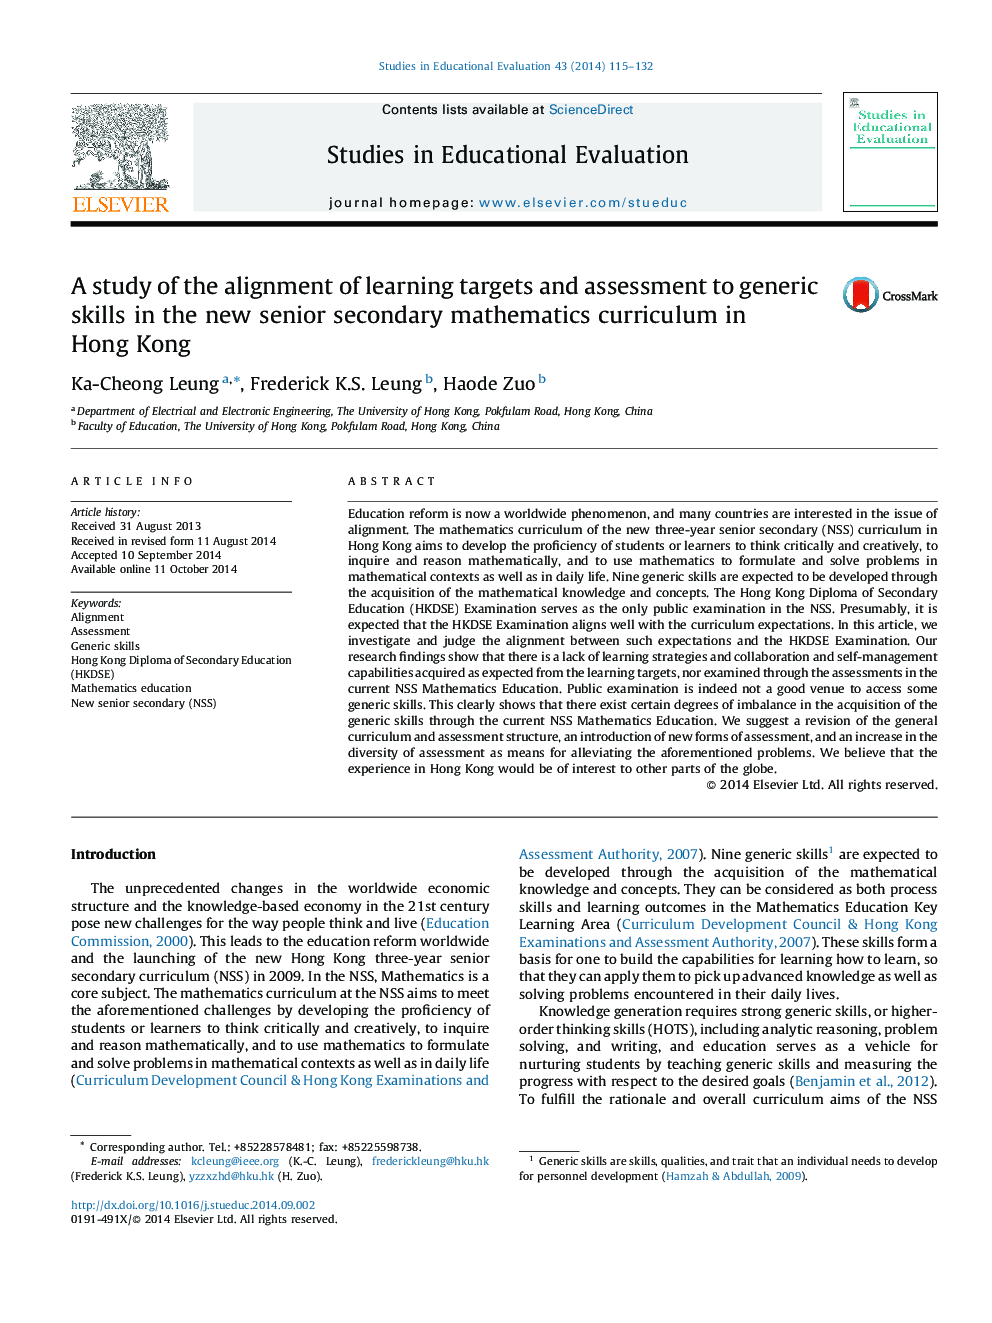 A study of the alignment of learning targets and assessment to generic skills in the new senior secondary mathematics curriculum in Hong Kong